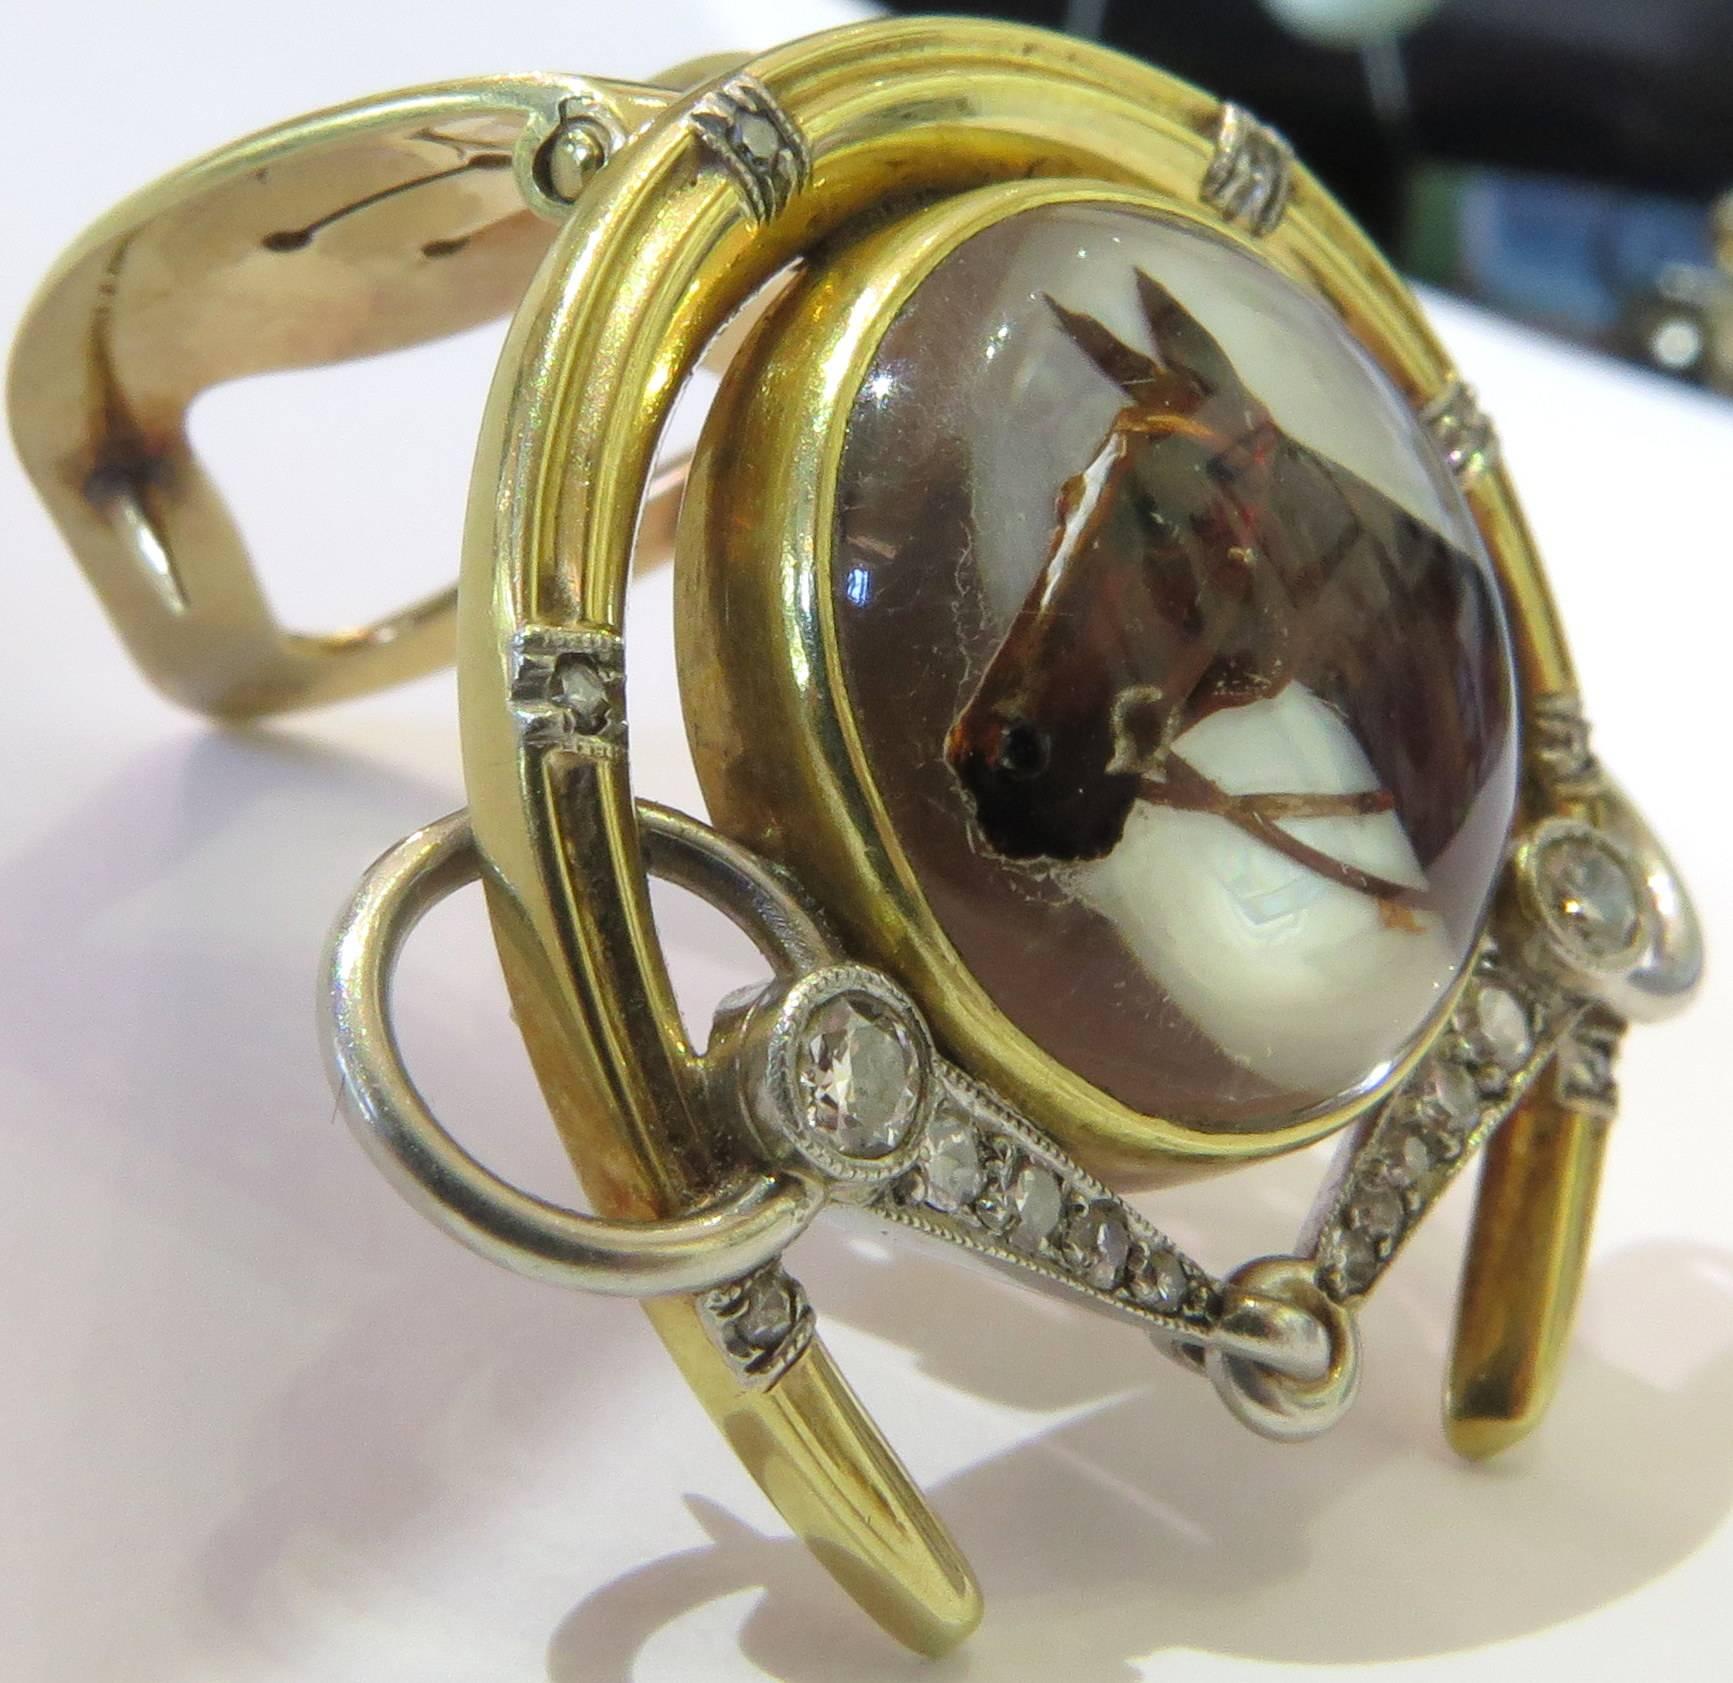 J.E. Caldwell is known for their high quality jewelry. This gold and platinum clip/pin is no exception. The reverse crystal horse head is surrounded by a horseshoe and diamond encrusted horse bit.This exquisite clip can easily be worn by a man or